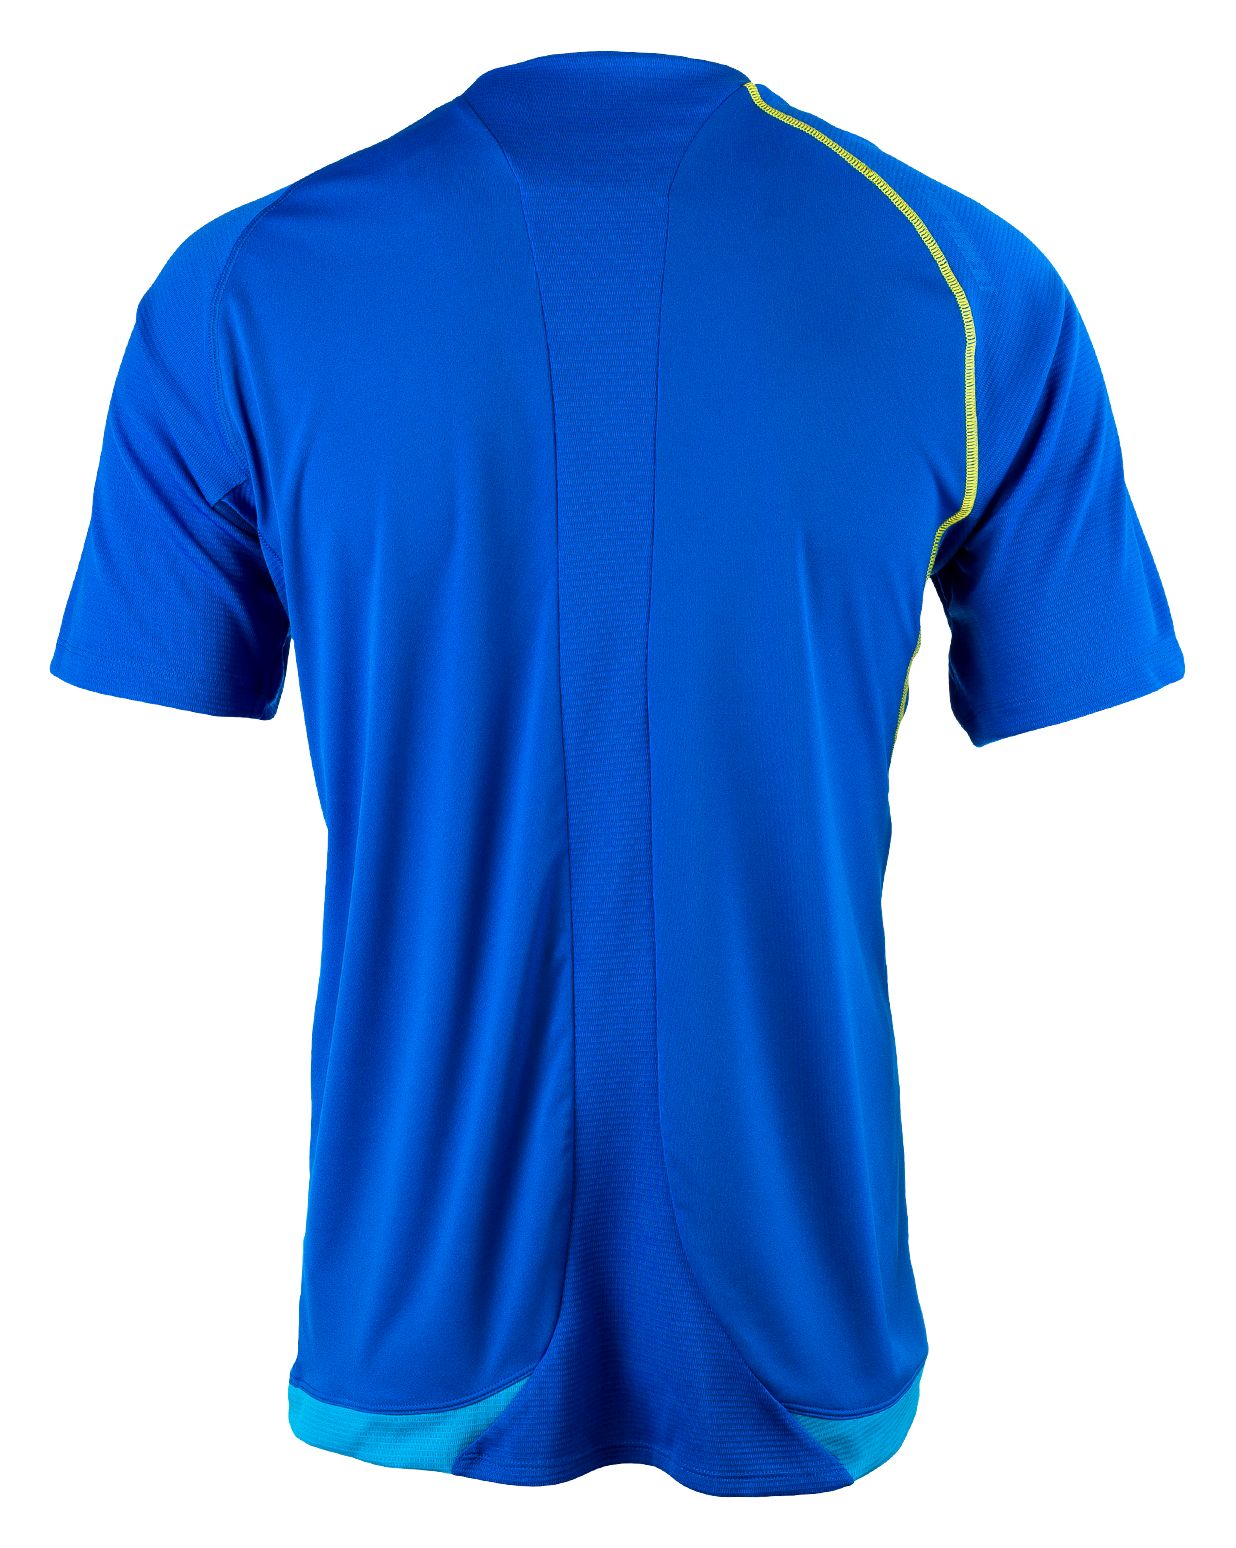 Superheat Training SS Jersey,  image number 0